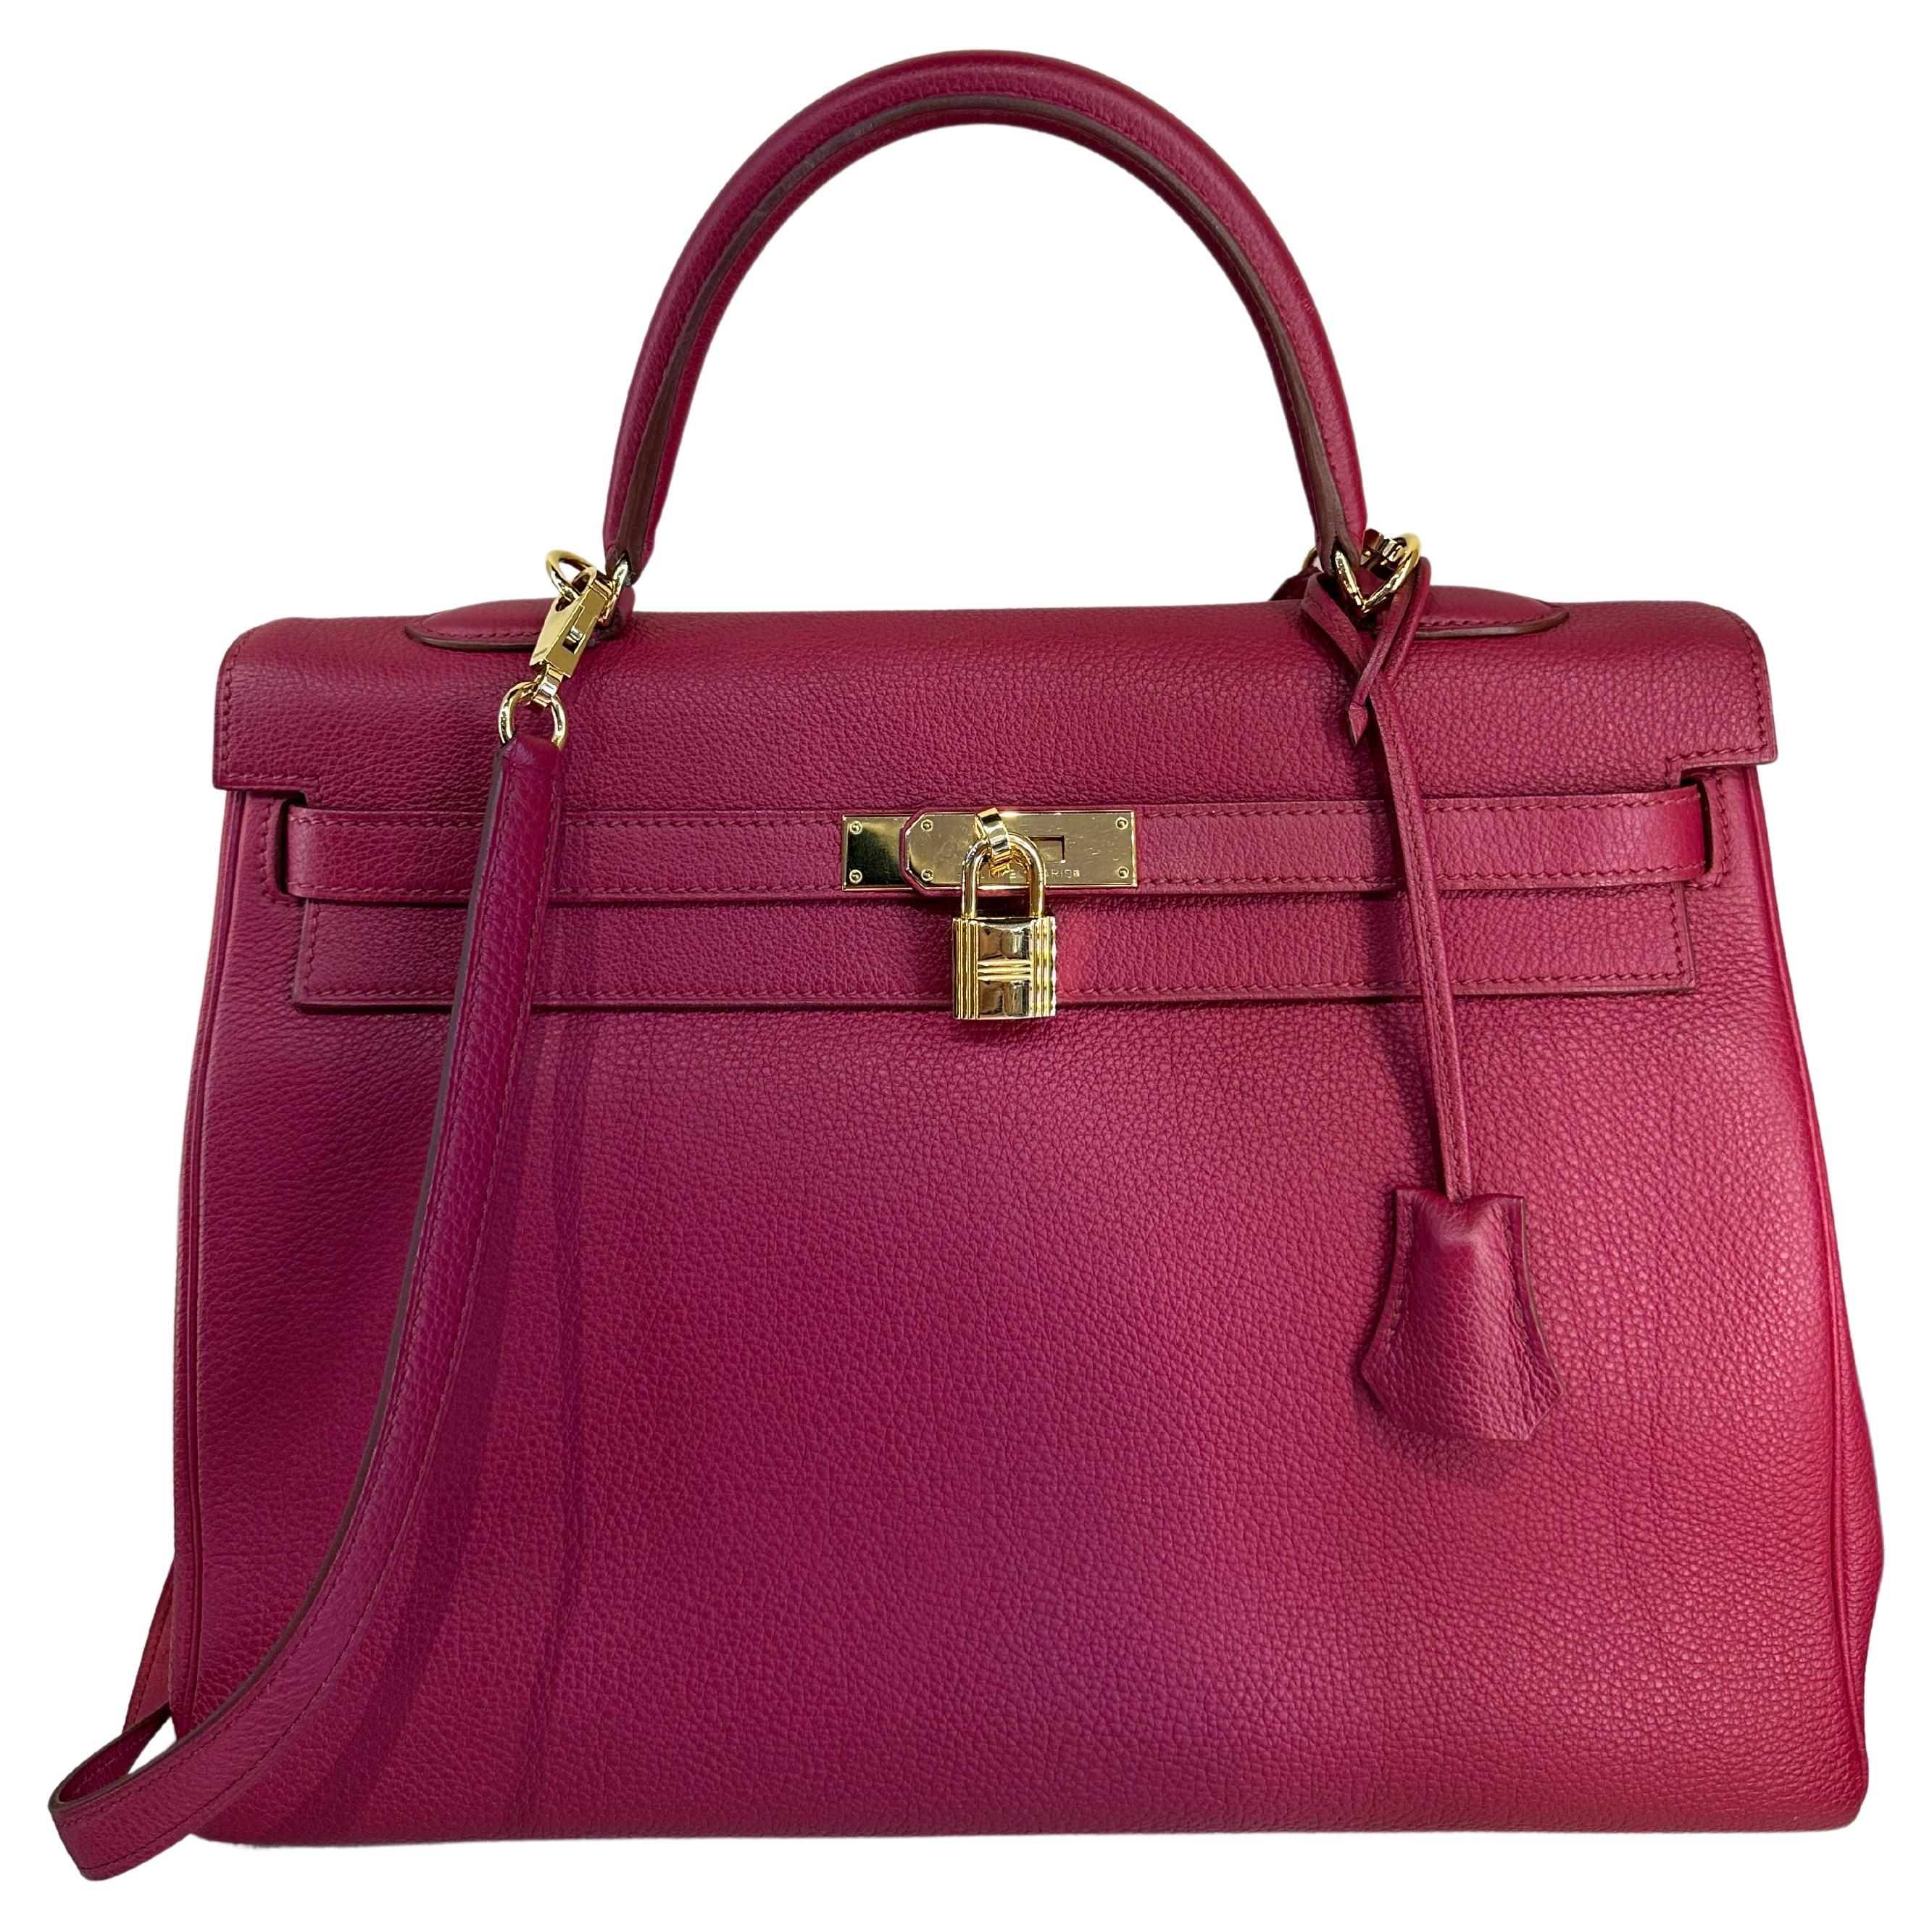 Hermes Kelly 35 Rubis colour Gold hardware